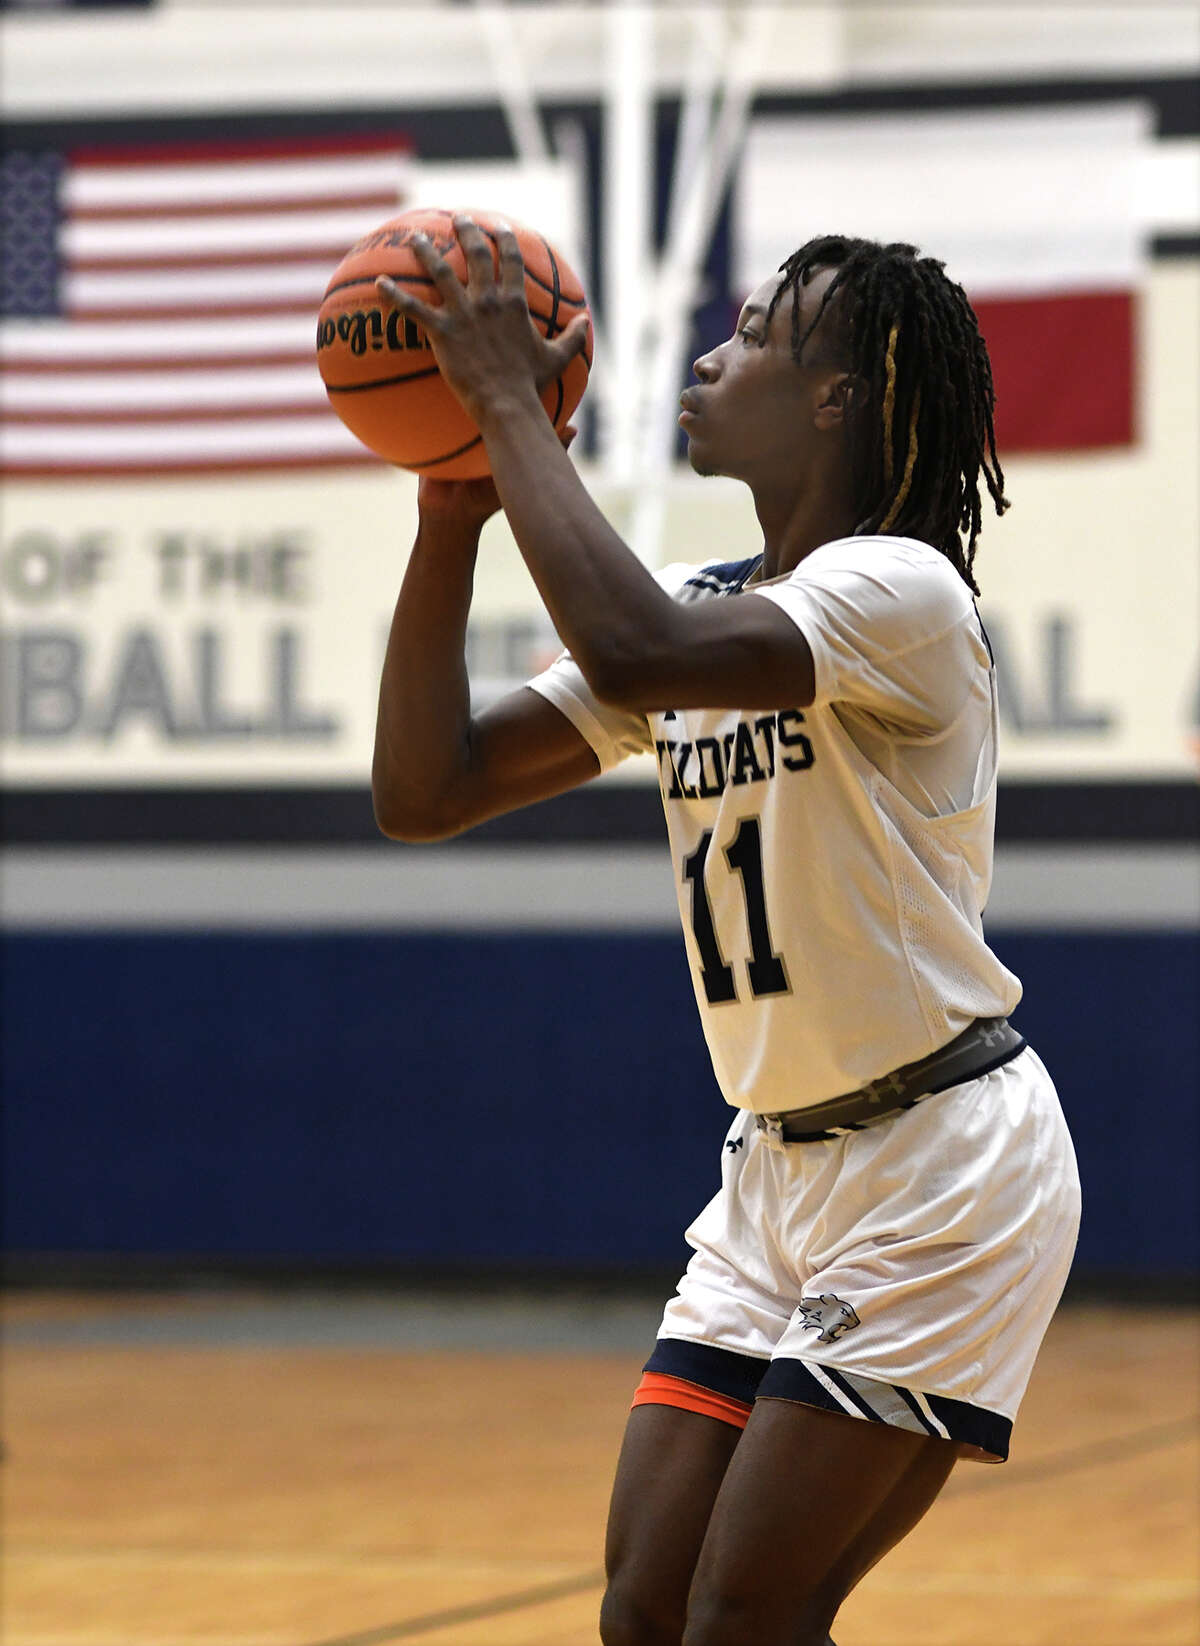 Tomball Memorial senior shooting guard Cory O'Bryant sets for a shot against Cy Ranch during the first quarter of their matchup at TMHS on Dec. 6, 2022.